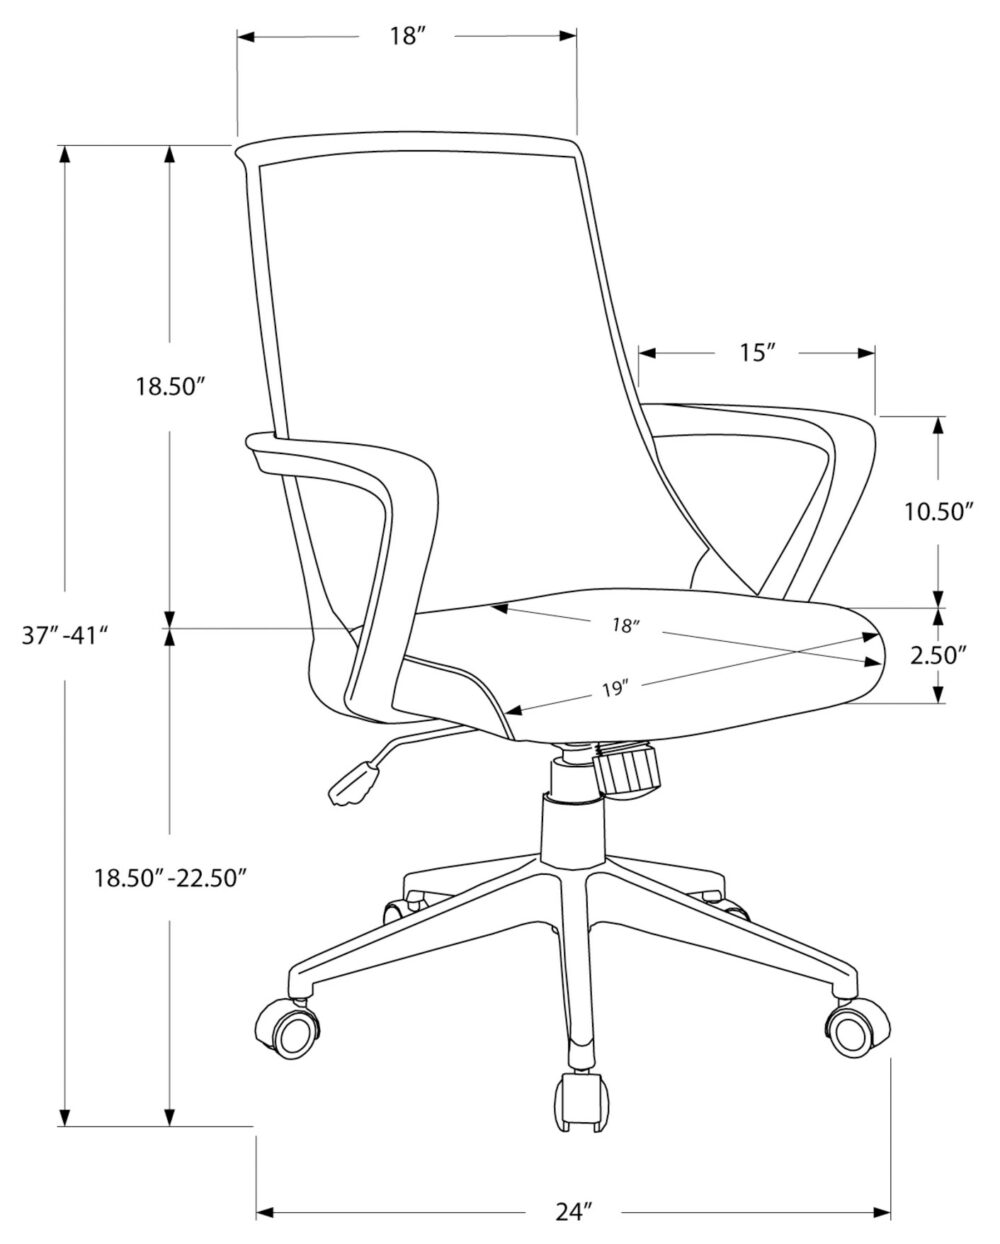 23818 - Office Chair - MN-7267 - Dimensions